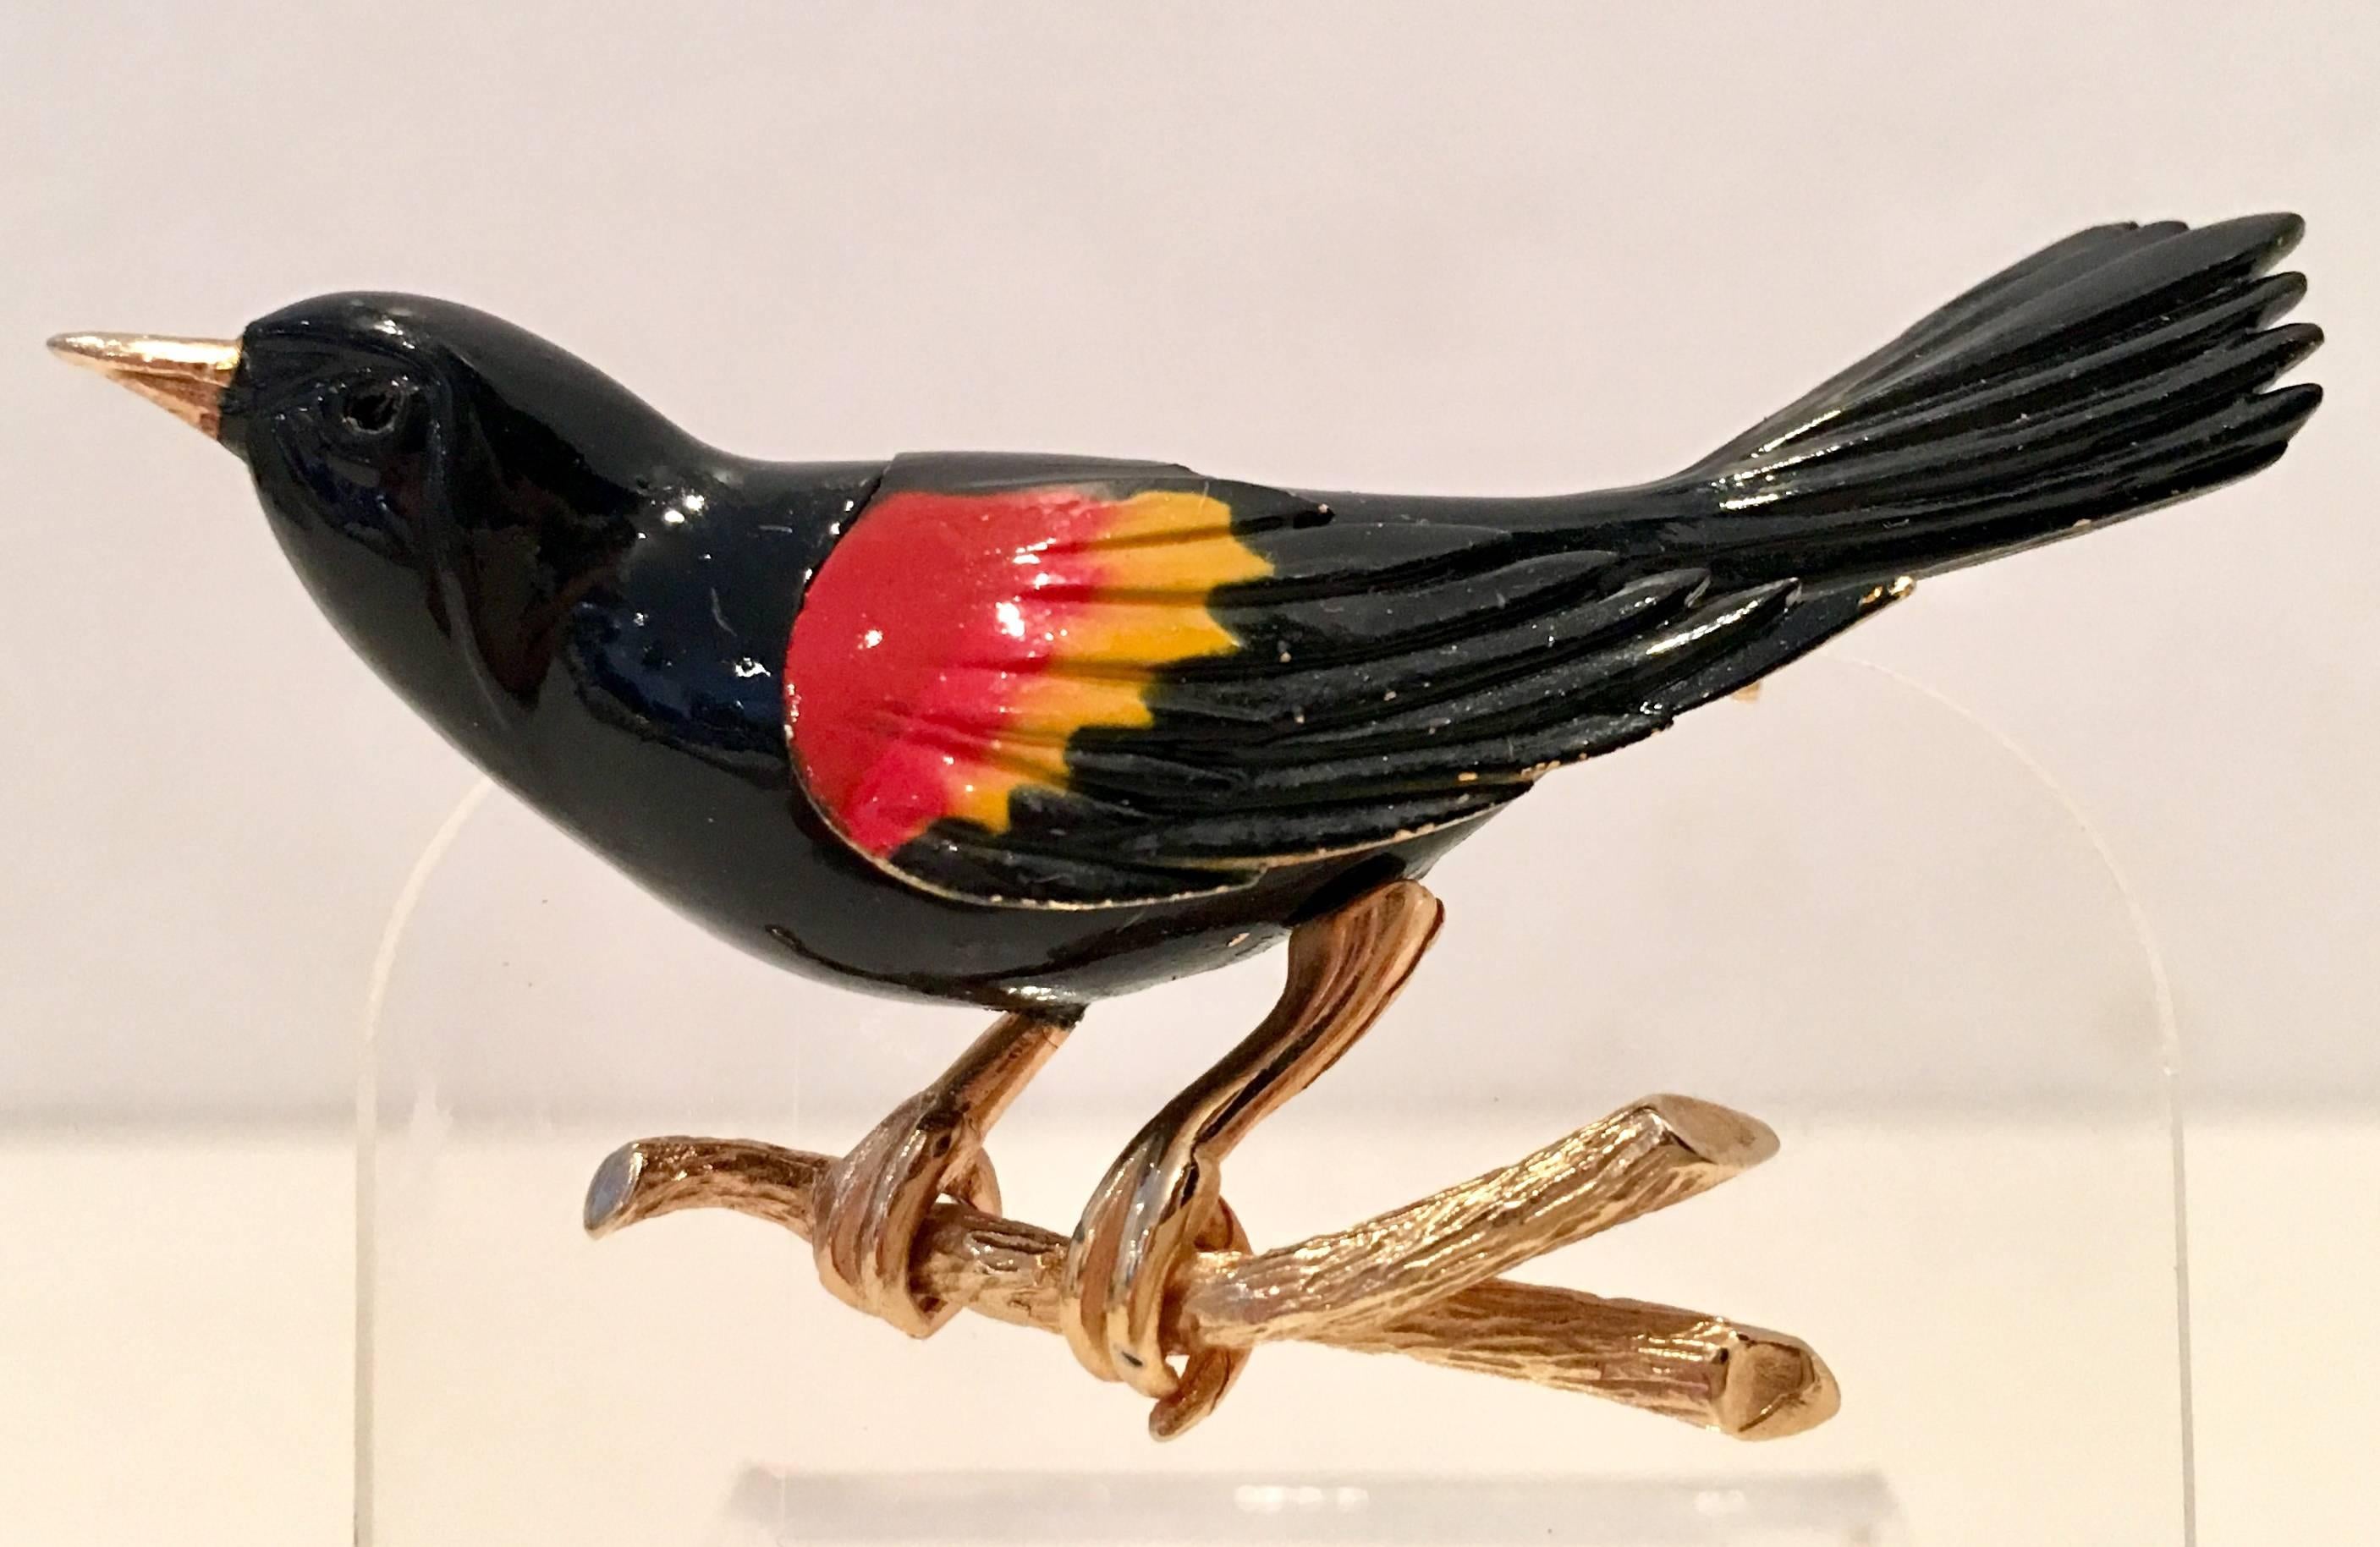 1960'S Gold plate & black enamel Bird Perched On A Branch brooch By, Weiss. Executed in black orange and yellow enamel perched on a branch and finished with gold plate. This bird brooch is signed on the underside, Weiss.